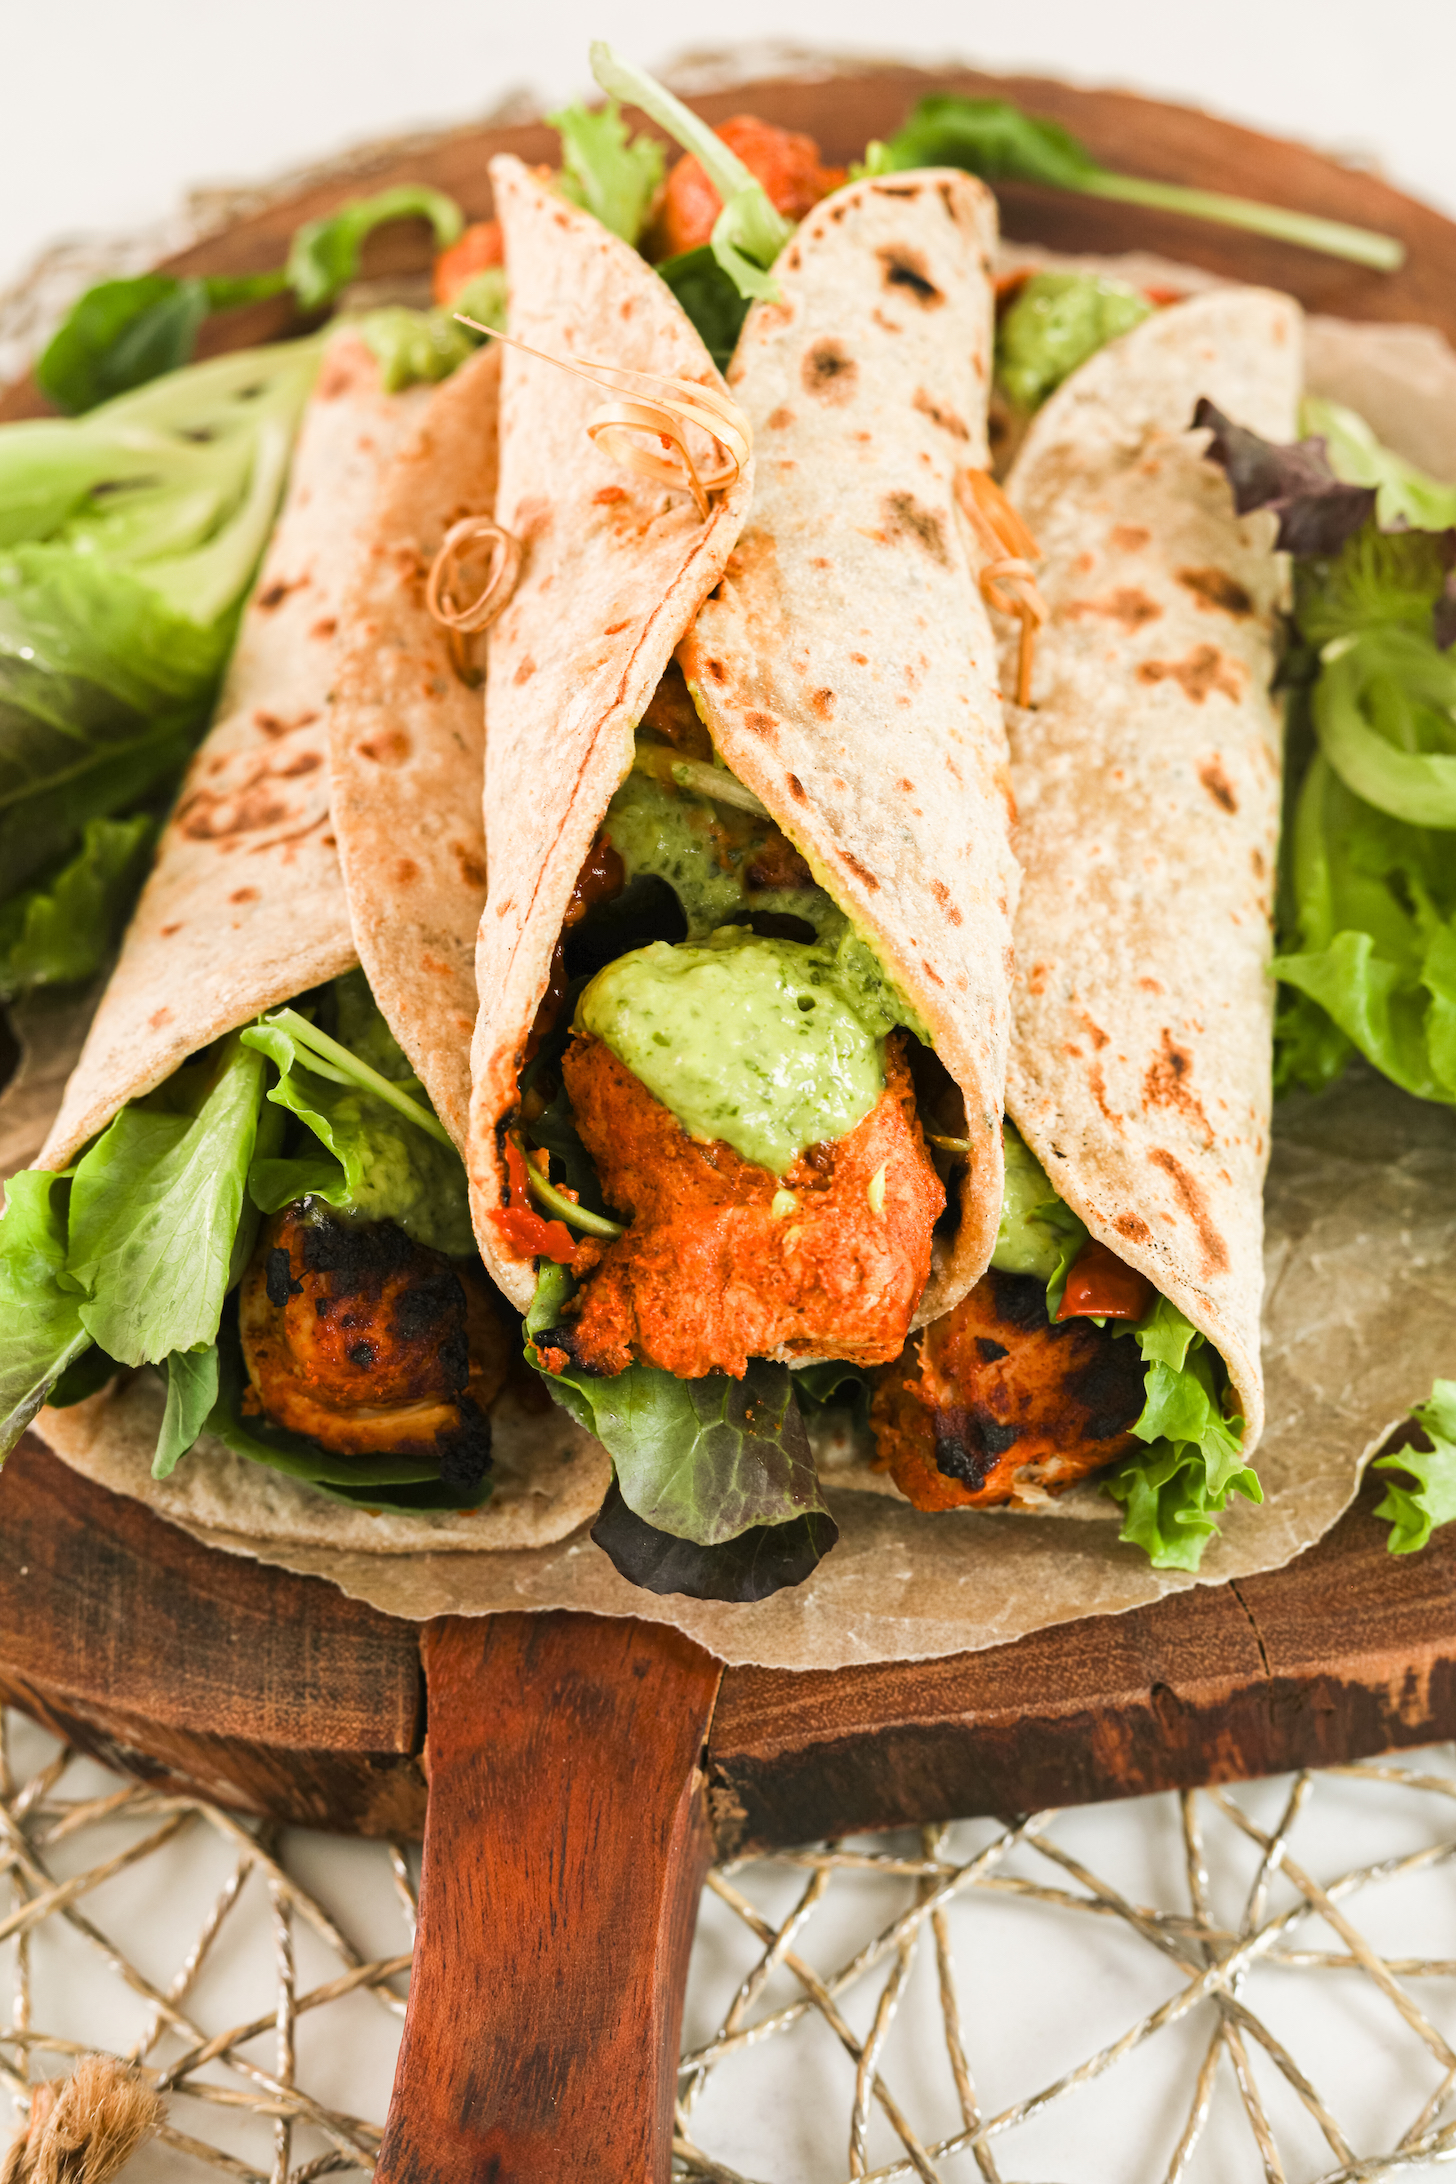 Perspective view of three chicken tikka wraps piled on top of fresh greens on a wooden board.